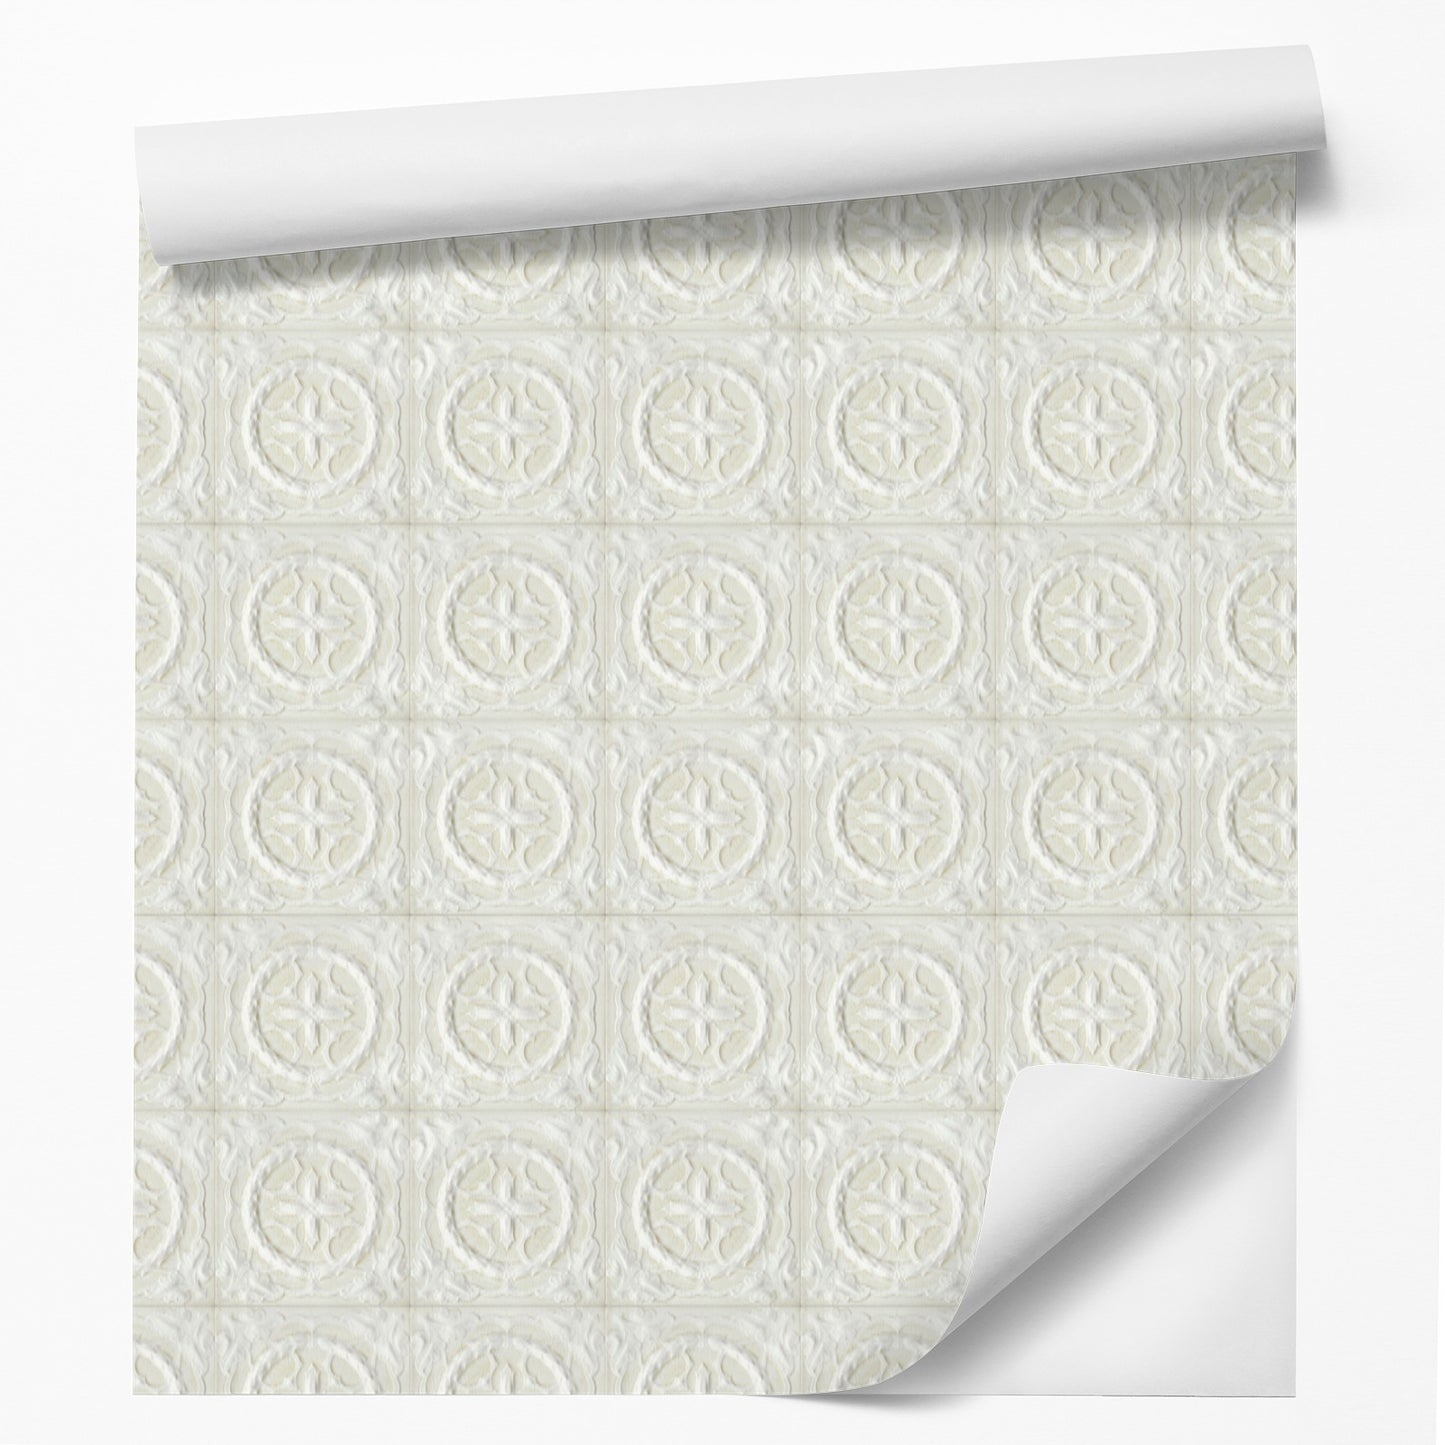 18' L x 24" W Peel & Stick Wallpaper Roll - Victorian White by DecoWorks - Wallpaper - Americanflat